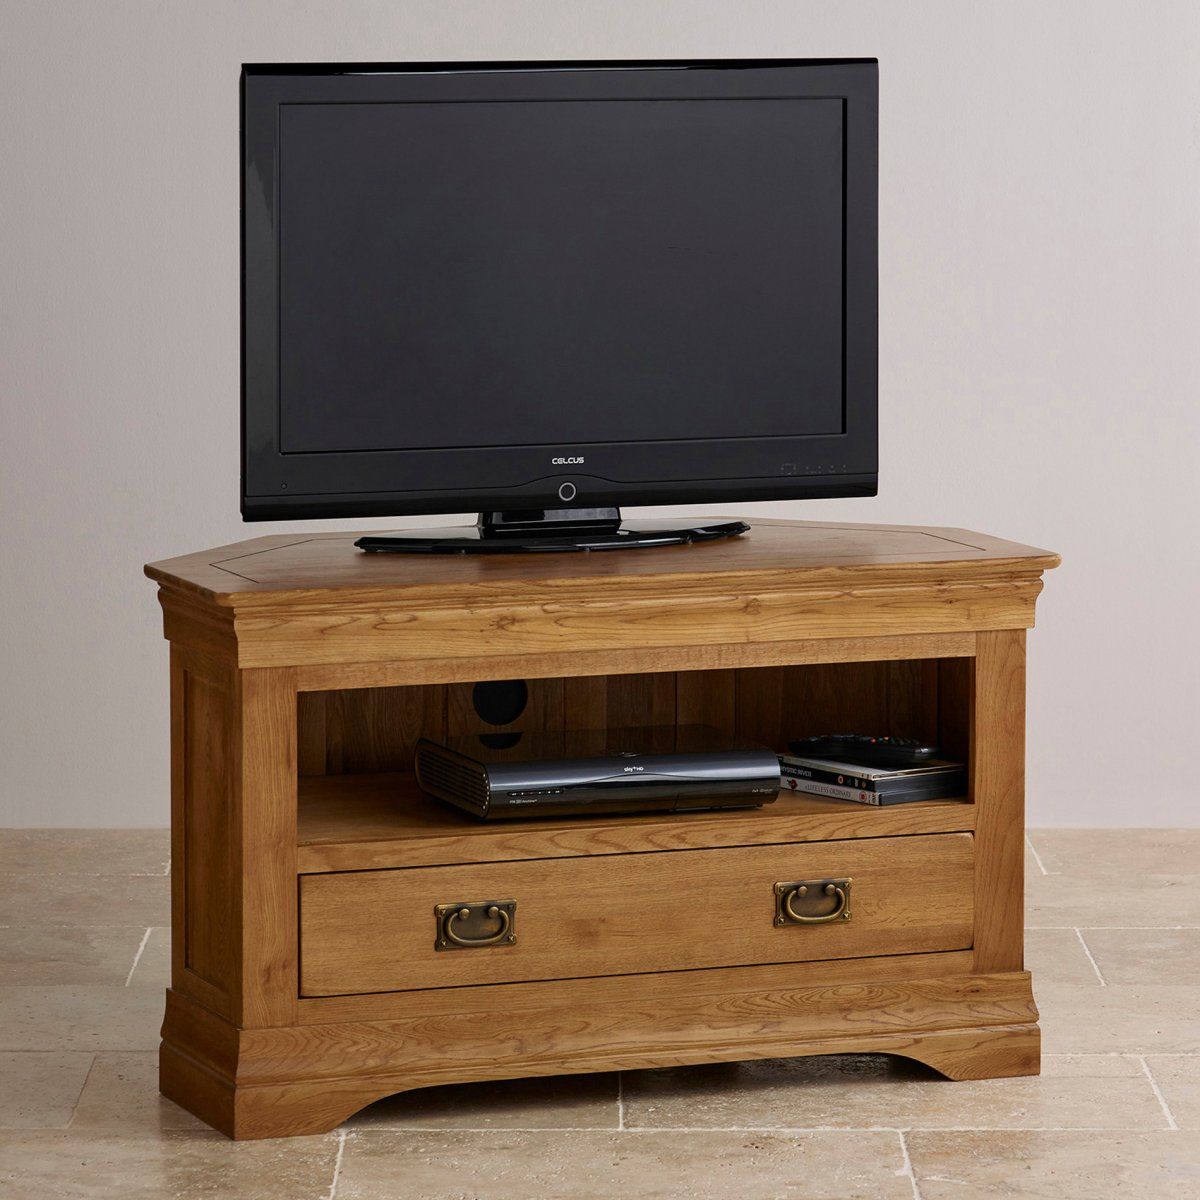 French Farmhouse Corner Tv Unit | Solid Oak | Oak Throughout Wooden Corner Tv Cabinets (View 4 of 15)